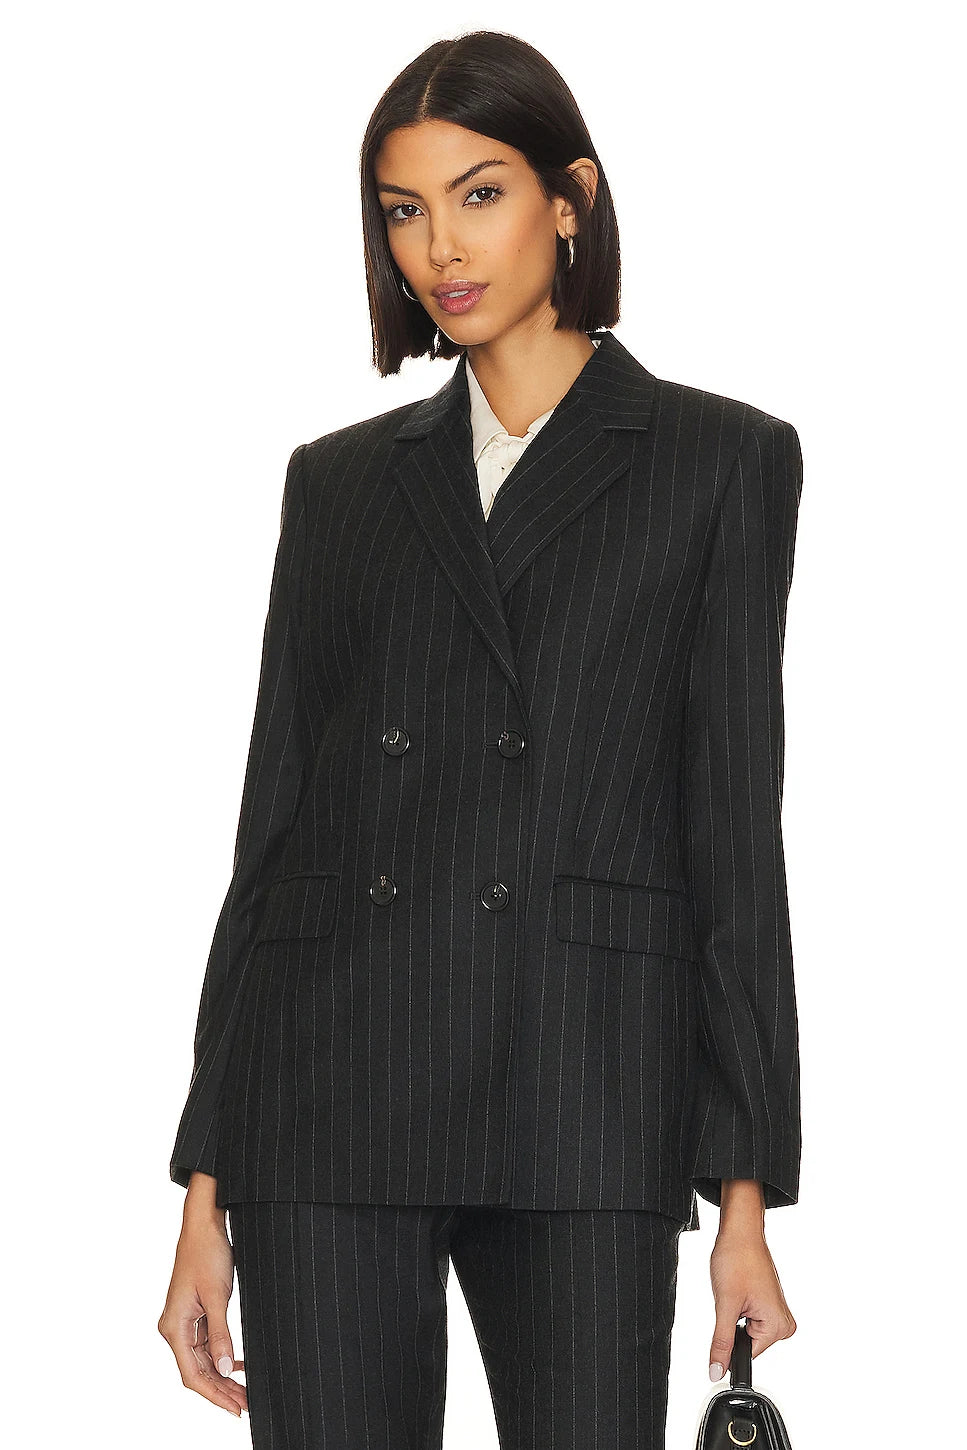 Step up your professional style with the Ensemble Mathilda—a business suit jacket and pants combo designed to take on the commute with style and attitude. Feel confident, empowered, and ready to tackle the day with this bold two-piece made to inspire.